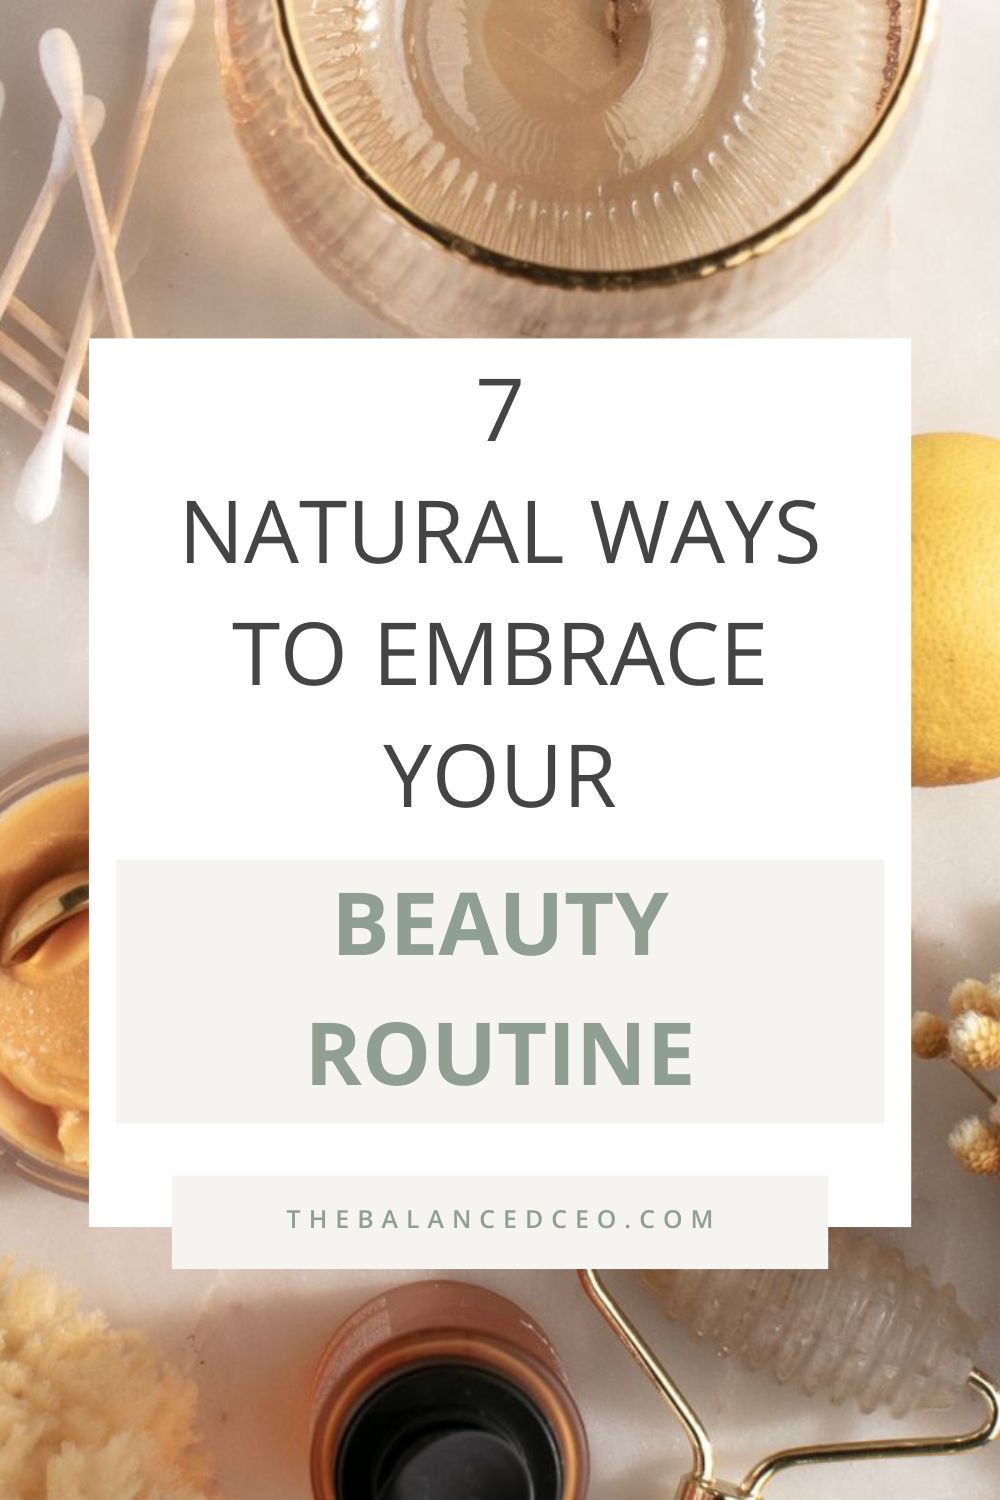 7 Natural Ways to Refresh Your Beauty Routine